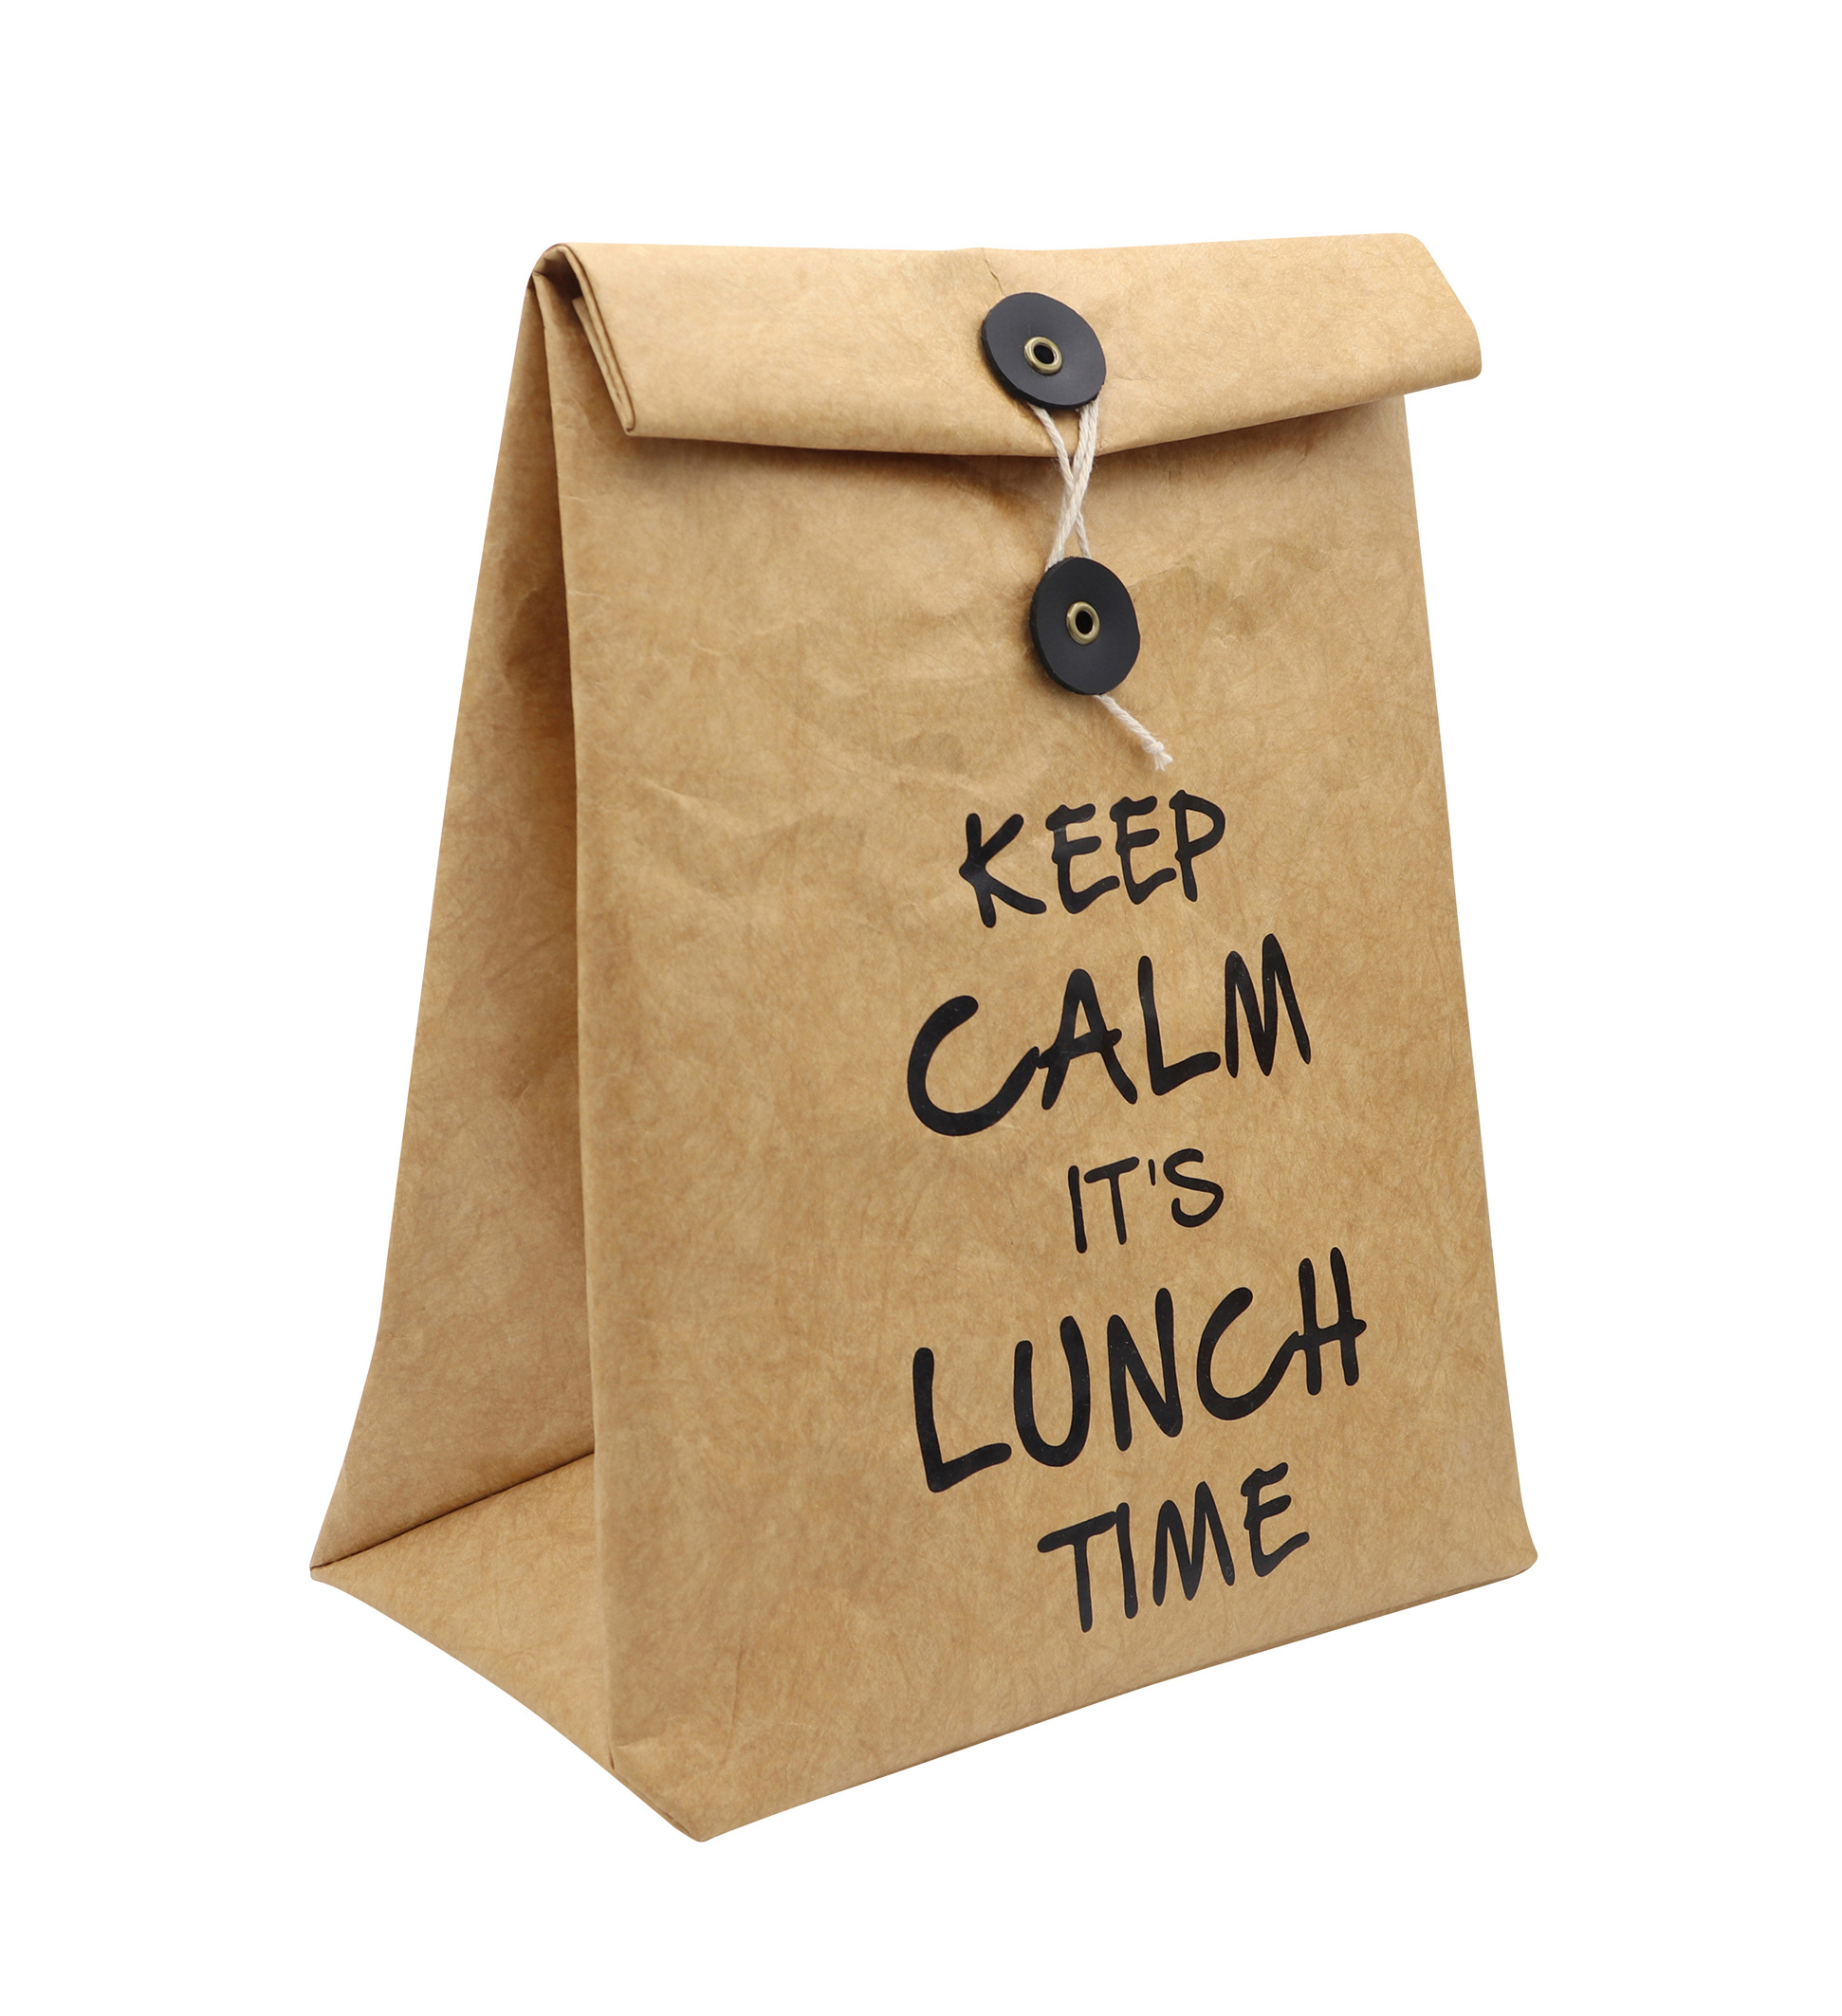 Sac à repas isotherme "Keep calm, it's lunch time" 